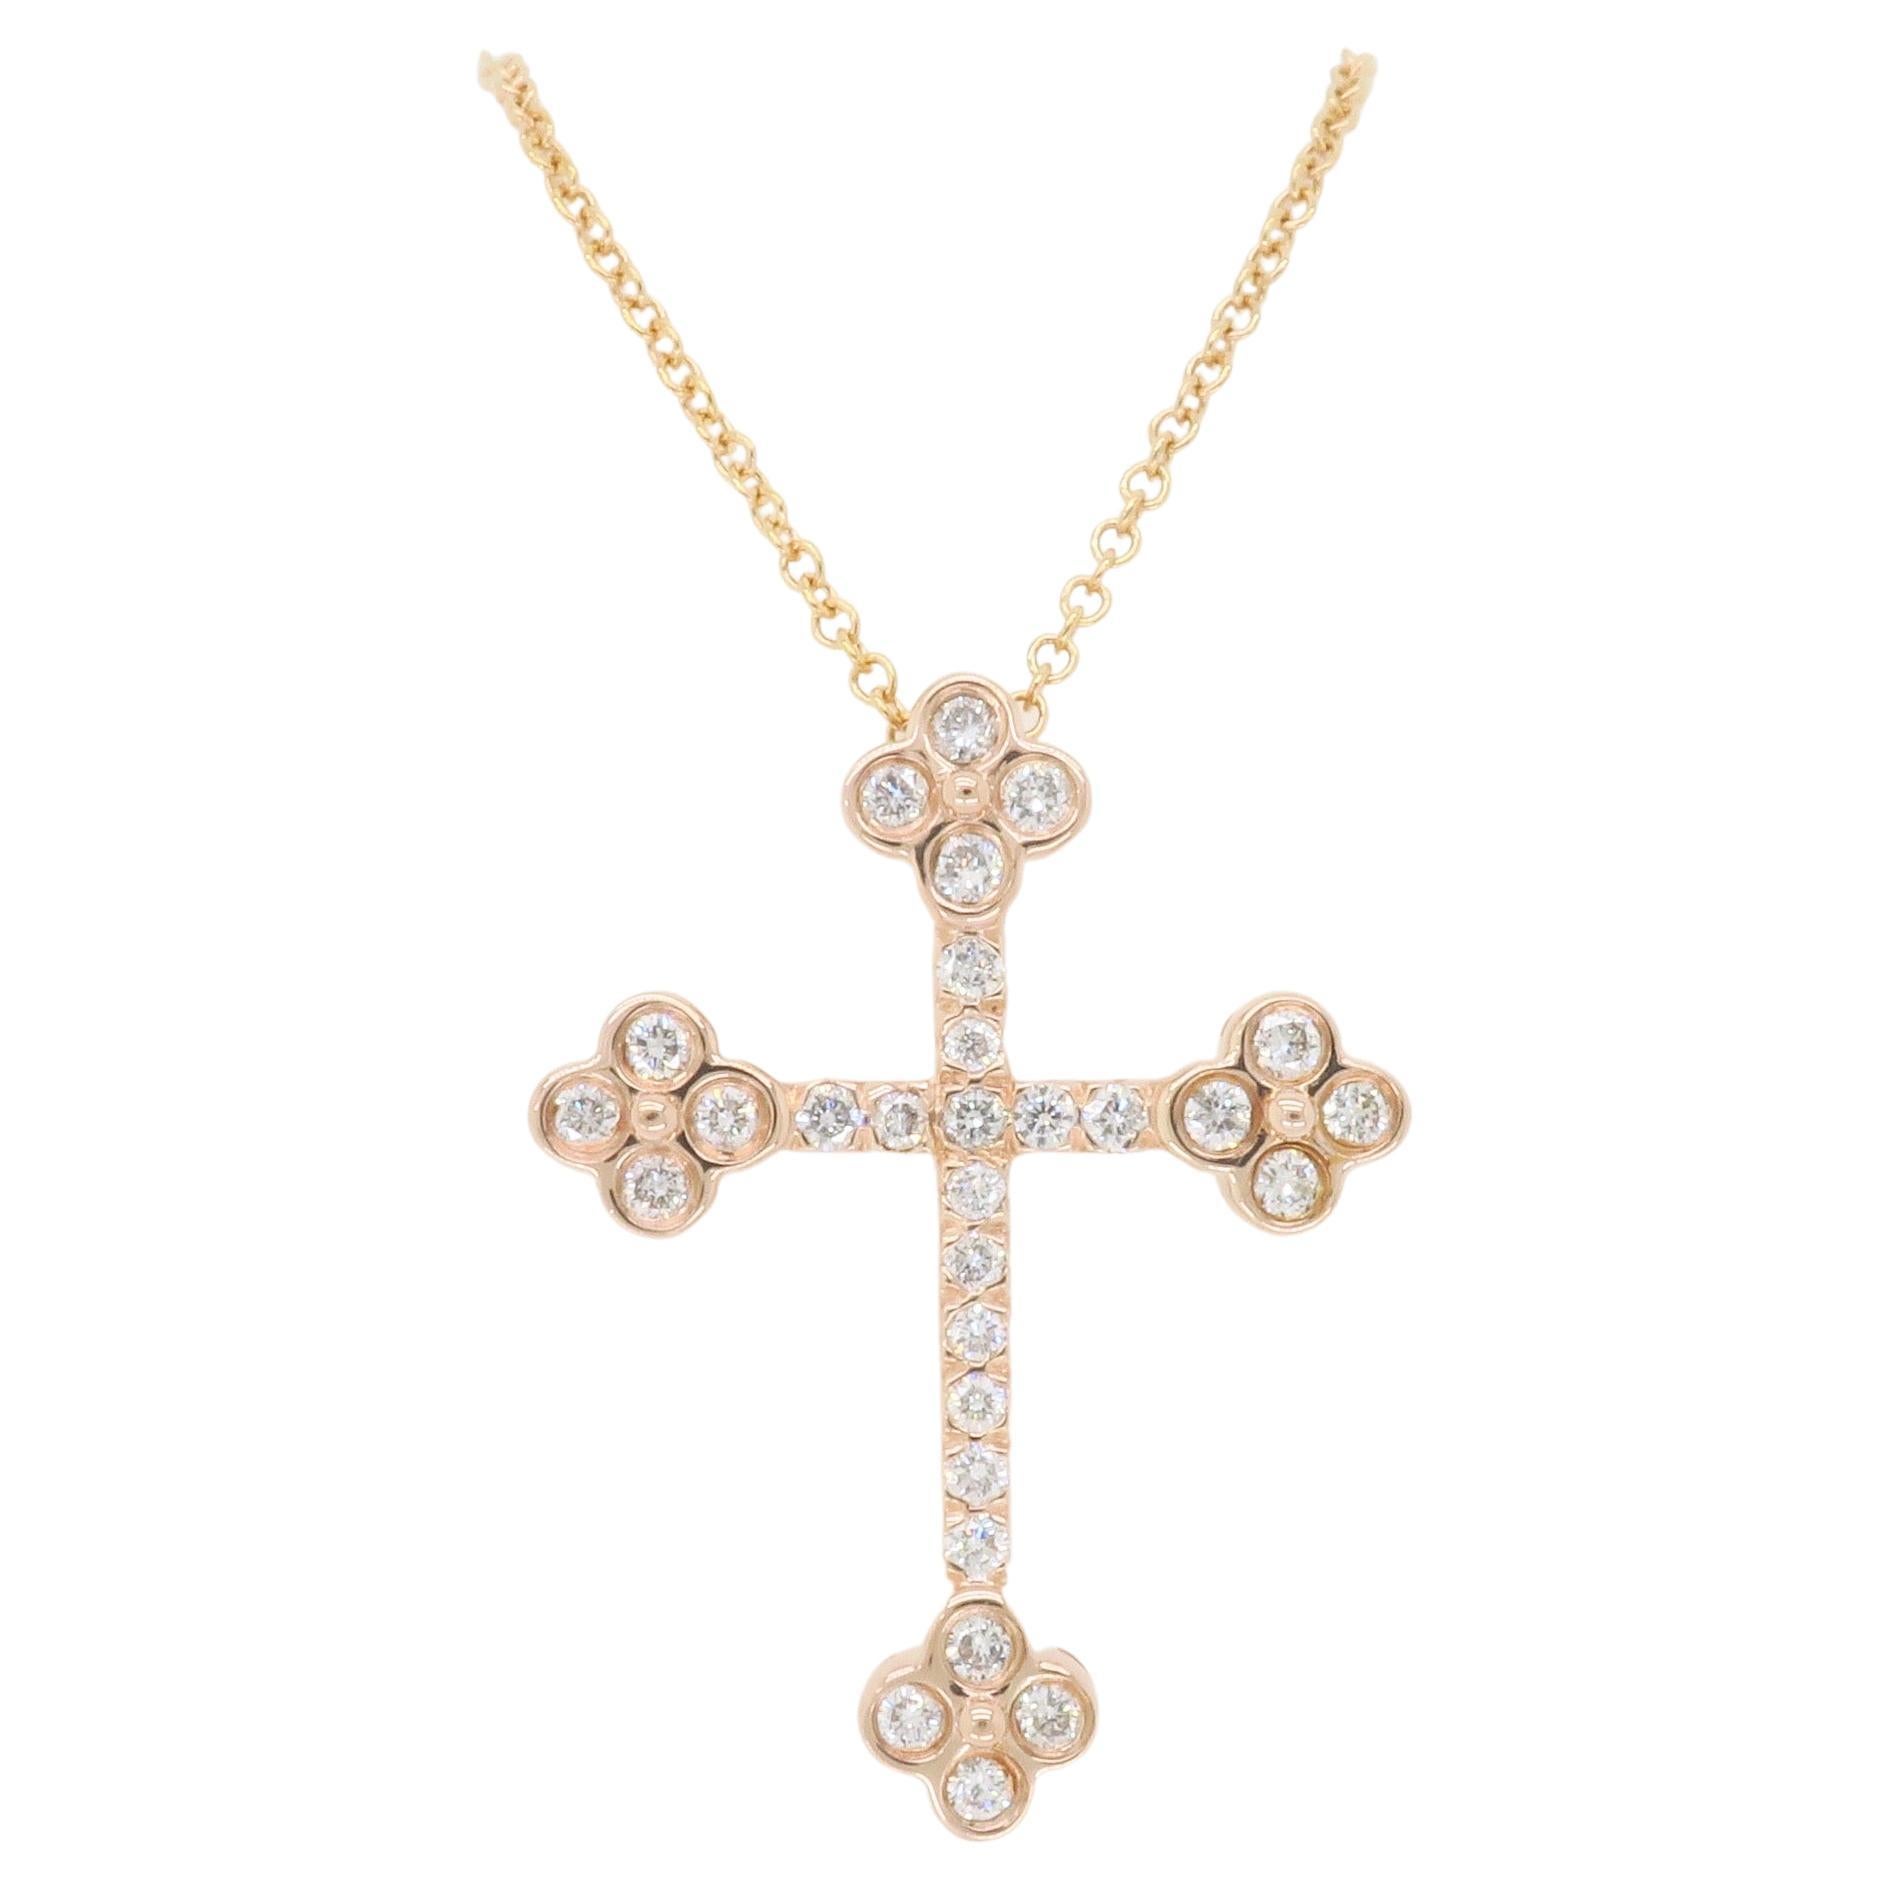 Diamond Cross Crafted in 14k Rose Gold